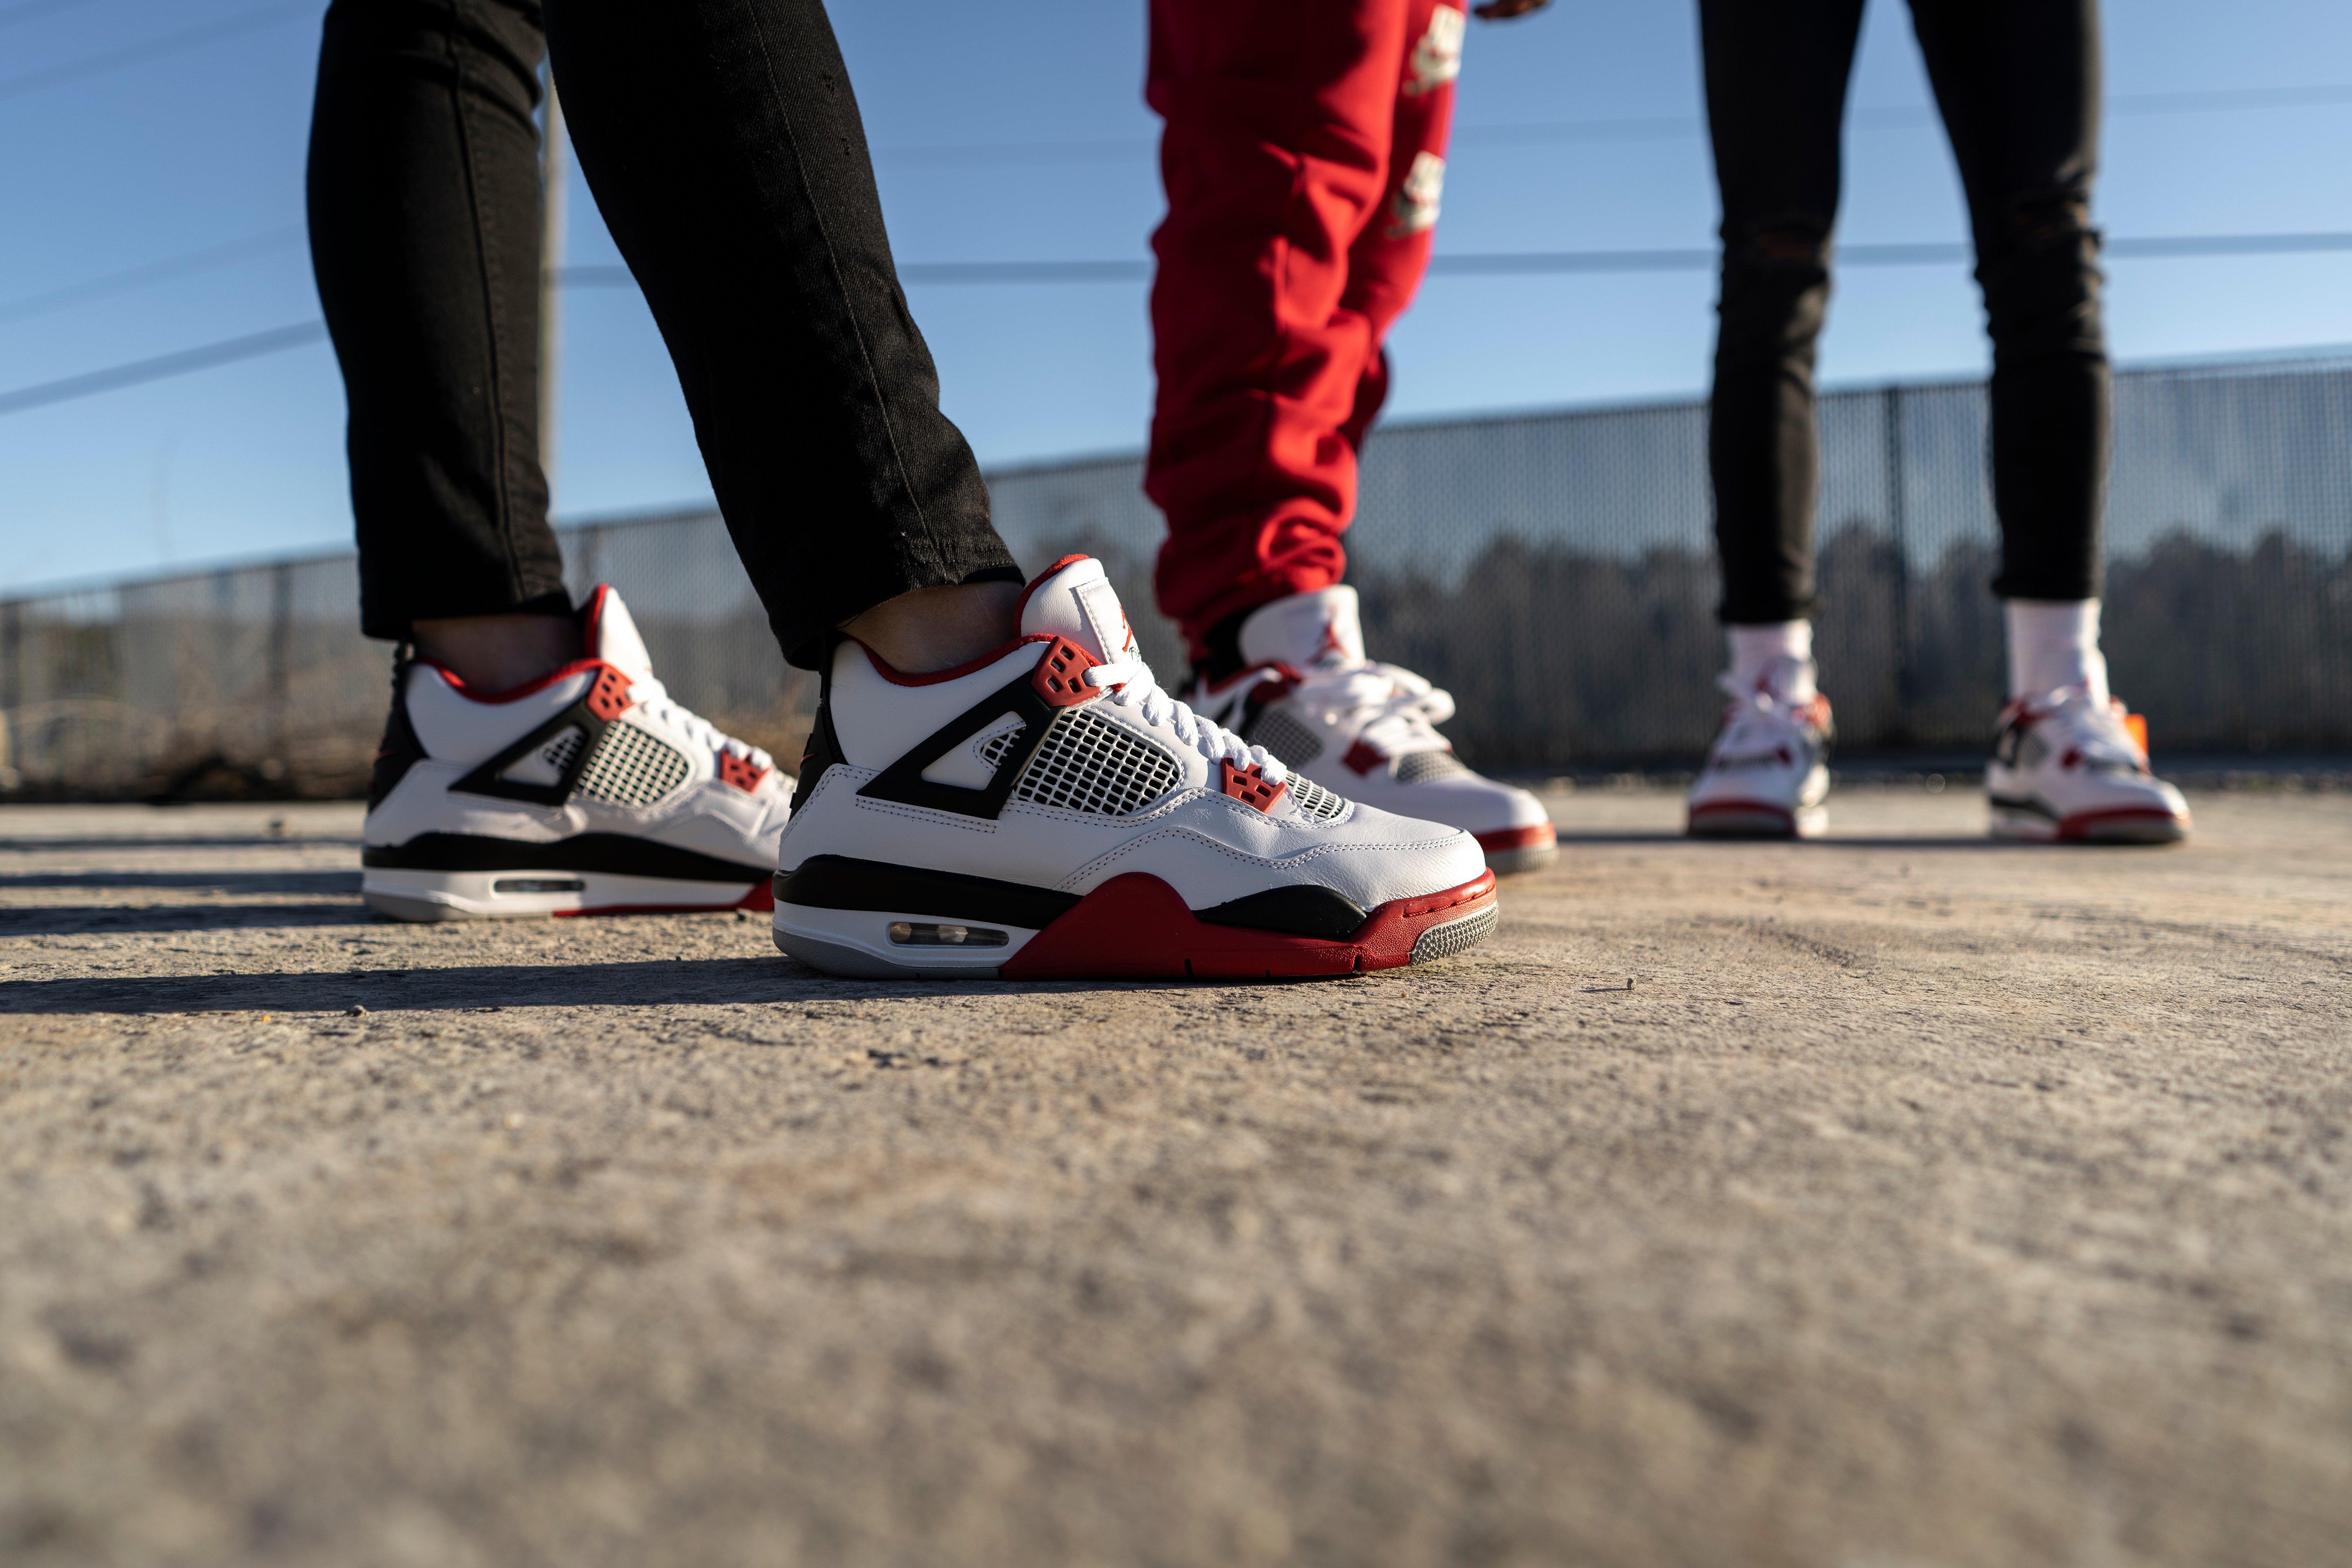 jordan 4 retro fire red outfit